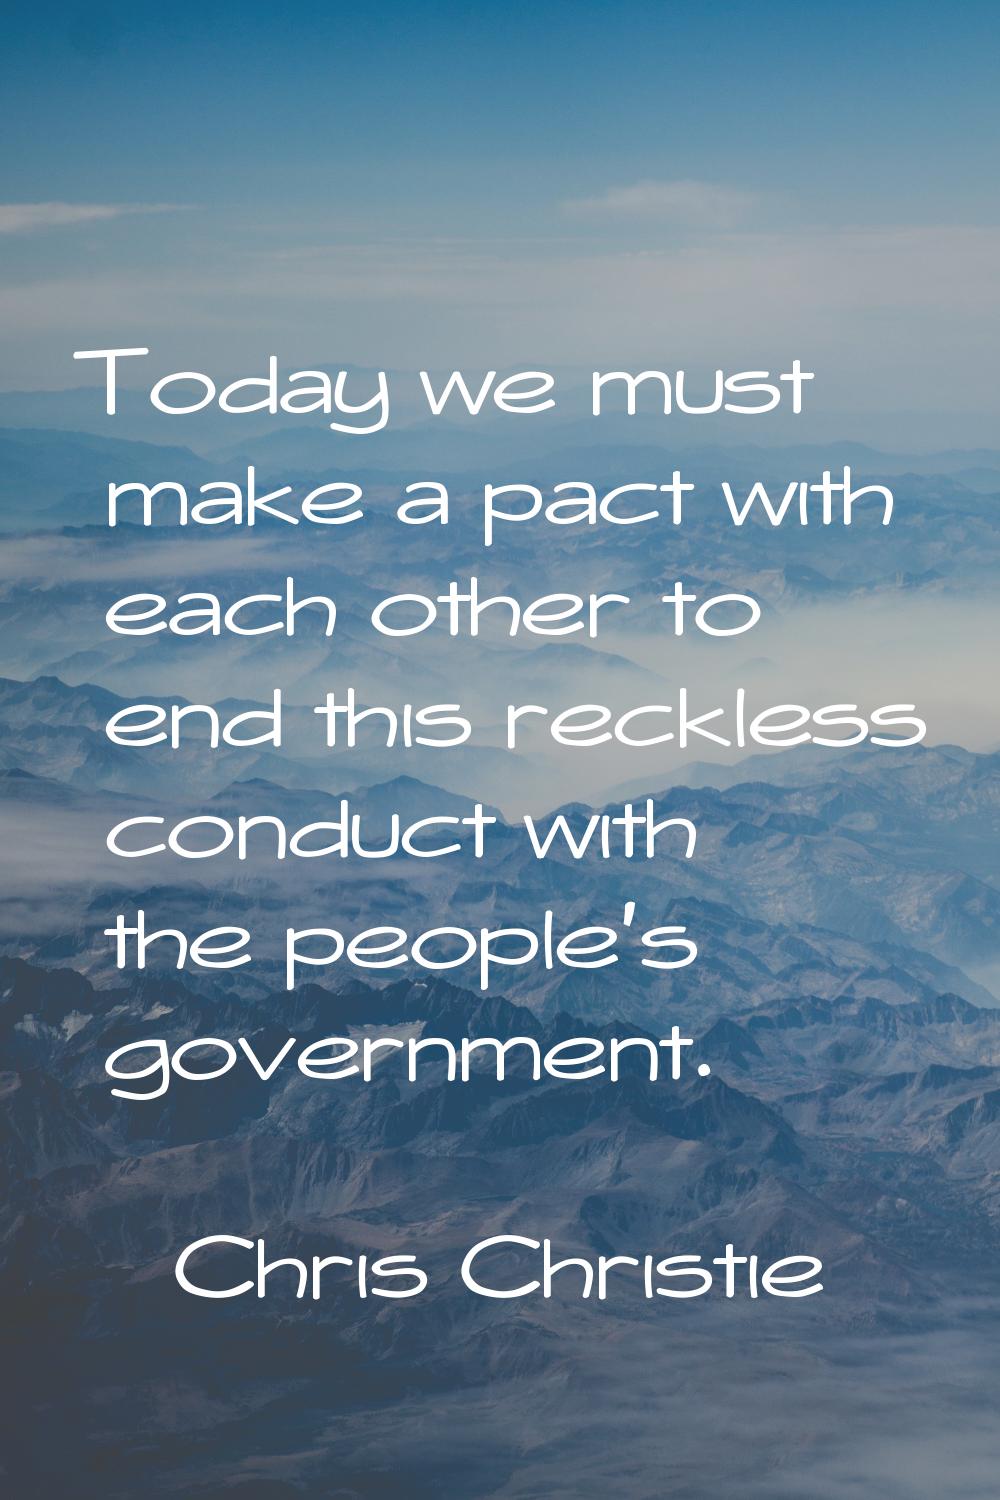 Today we must make a pact with each other to end this reckless conduct with the people's government